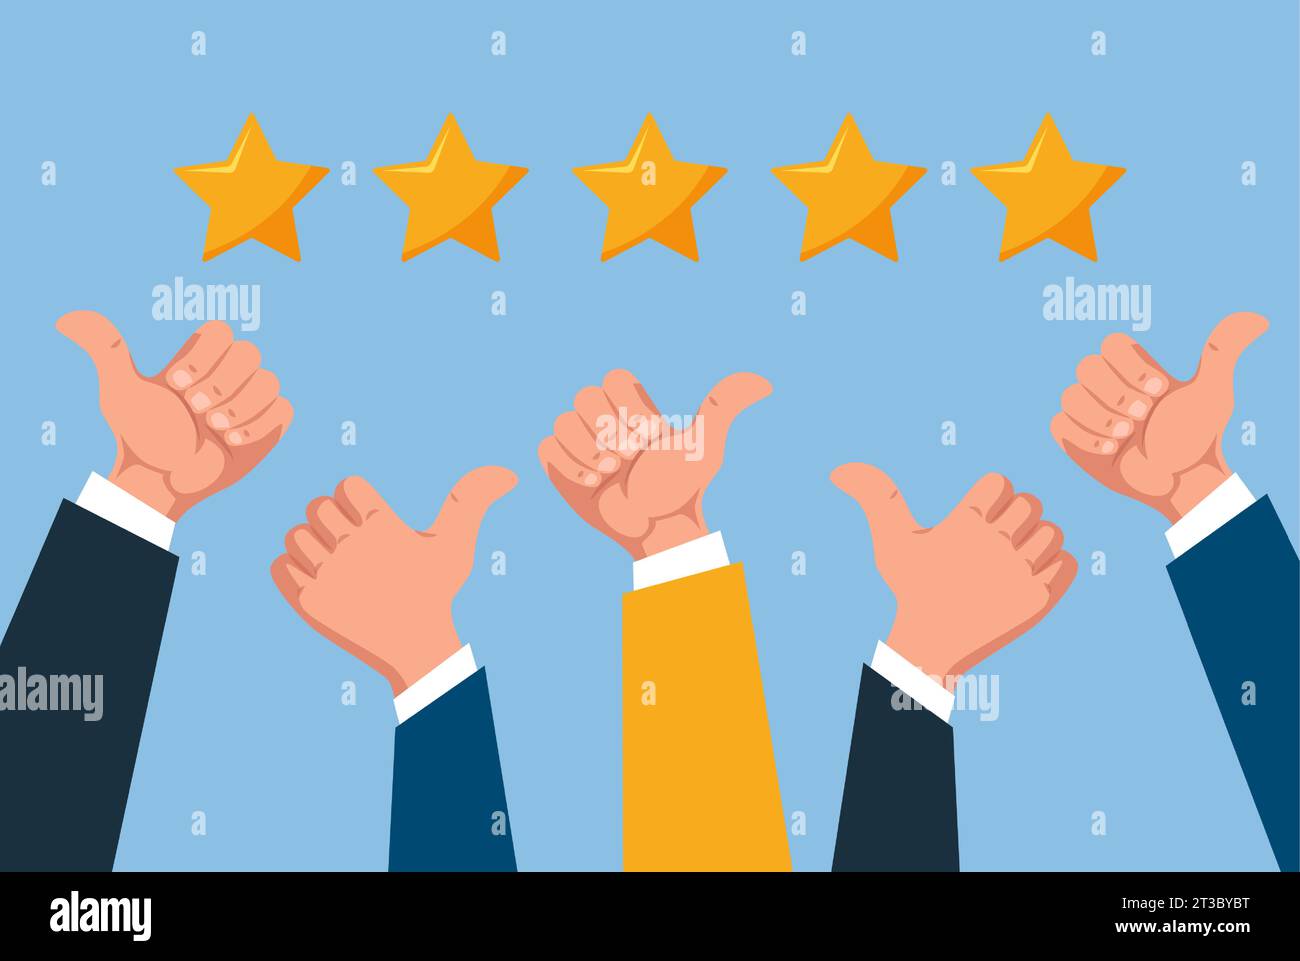 Vector of people hands giving thumbs up, concept of customer review and a five star rating and positive feedback Stock Vector